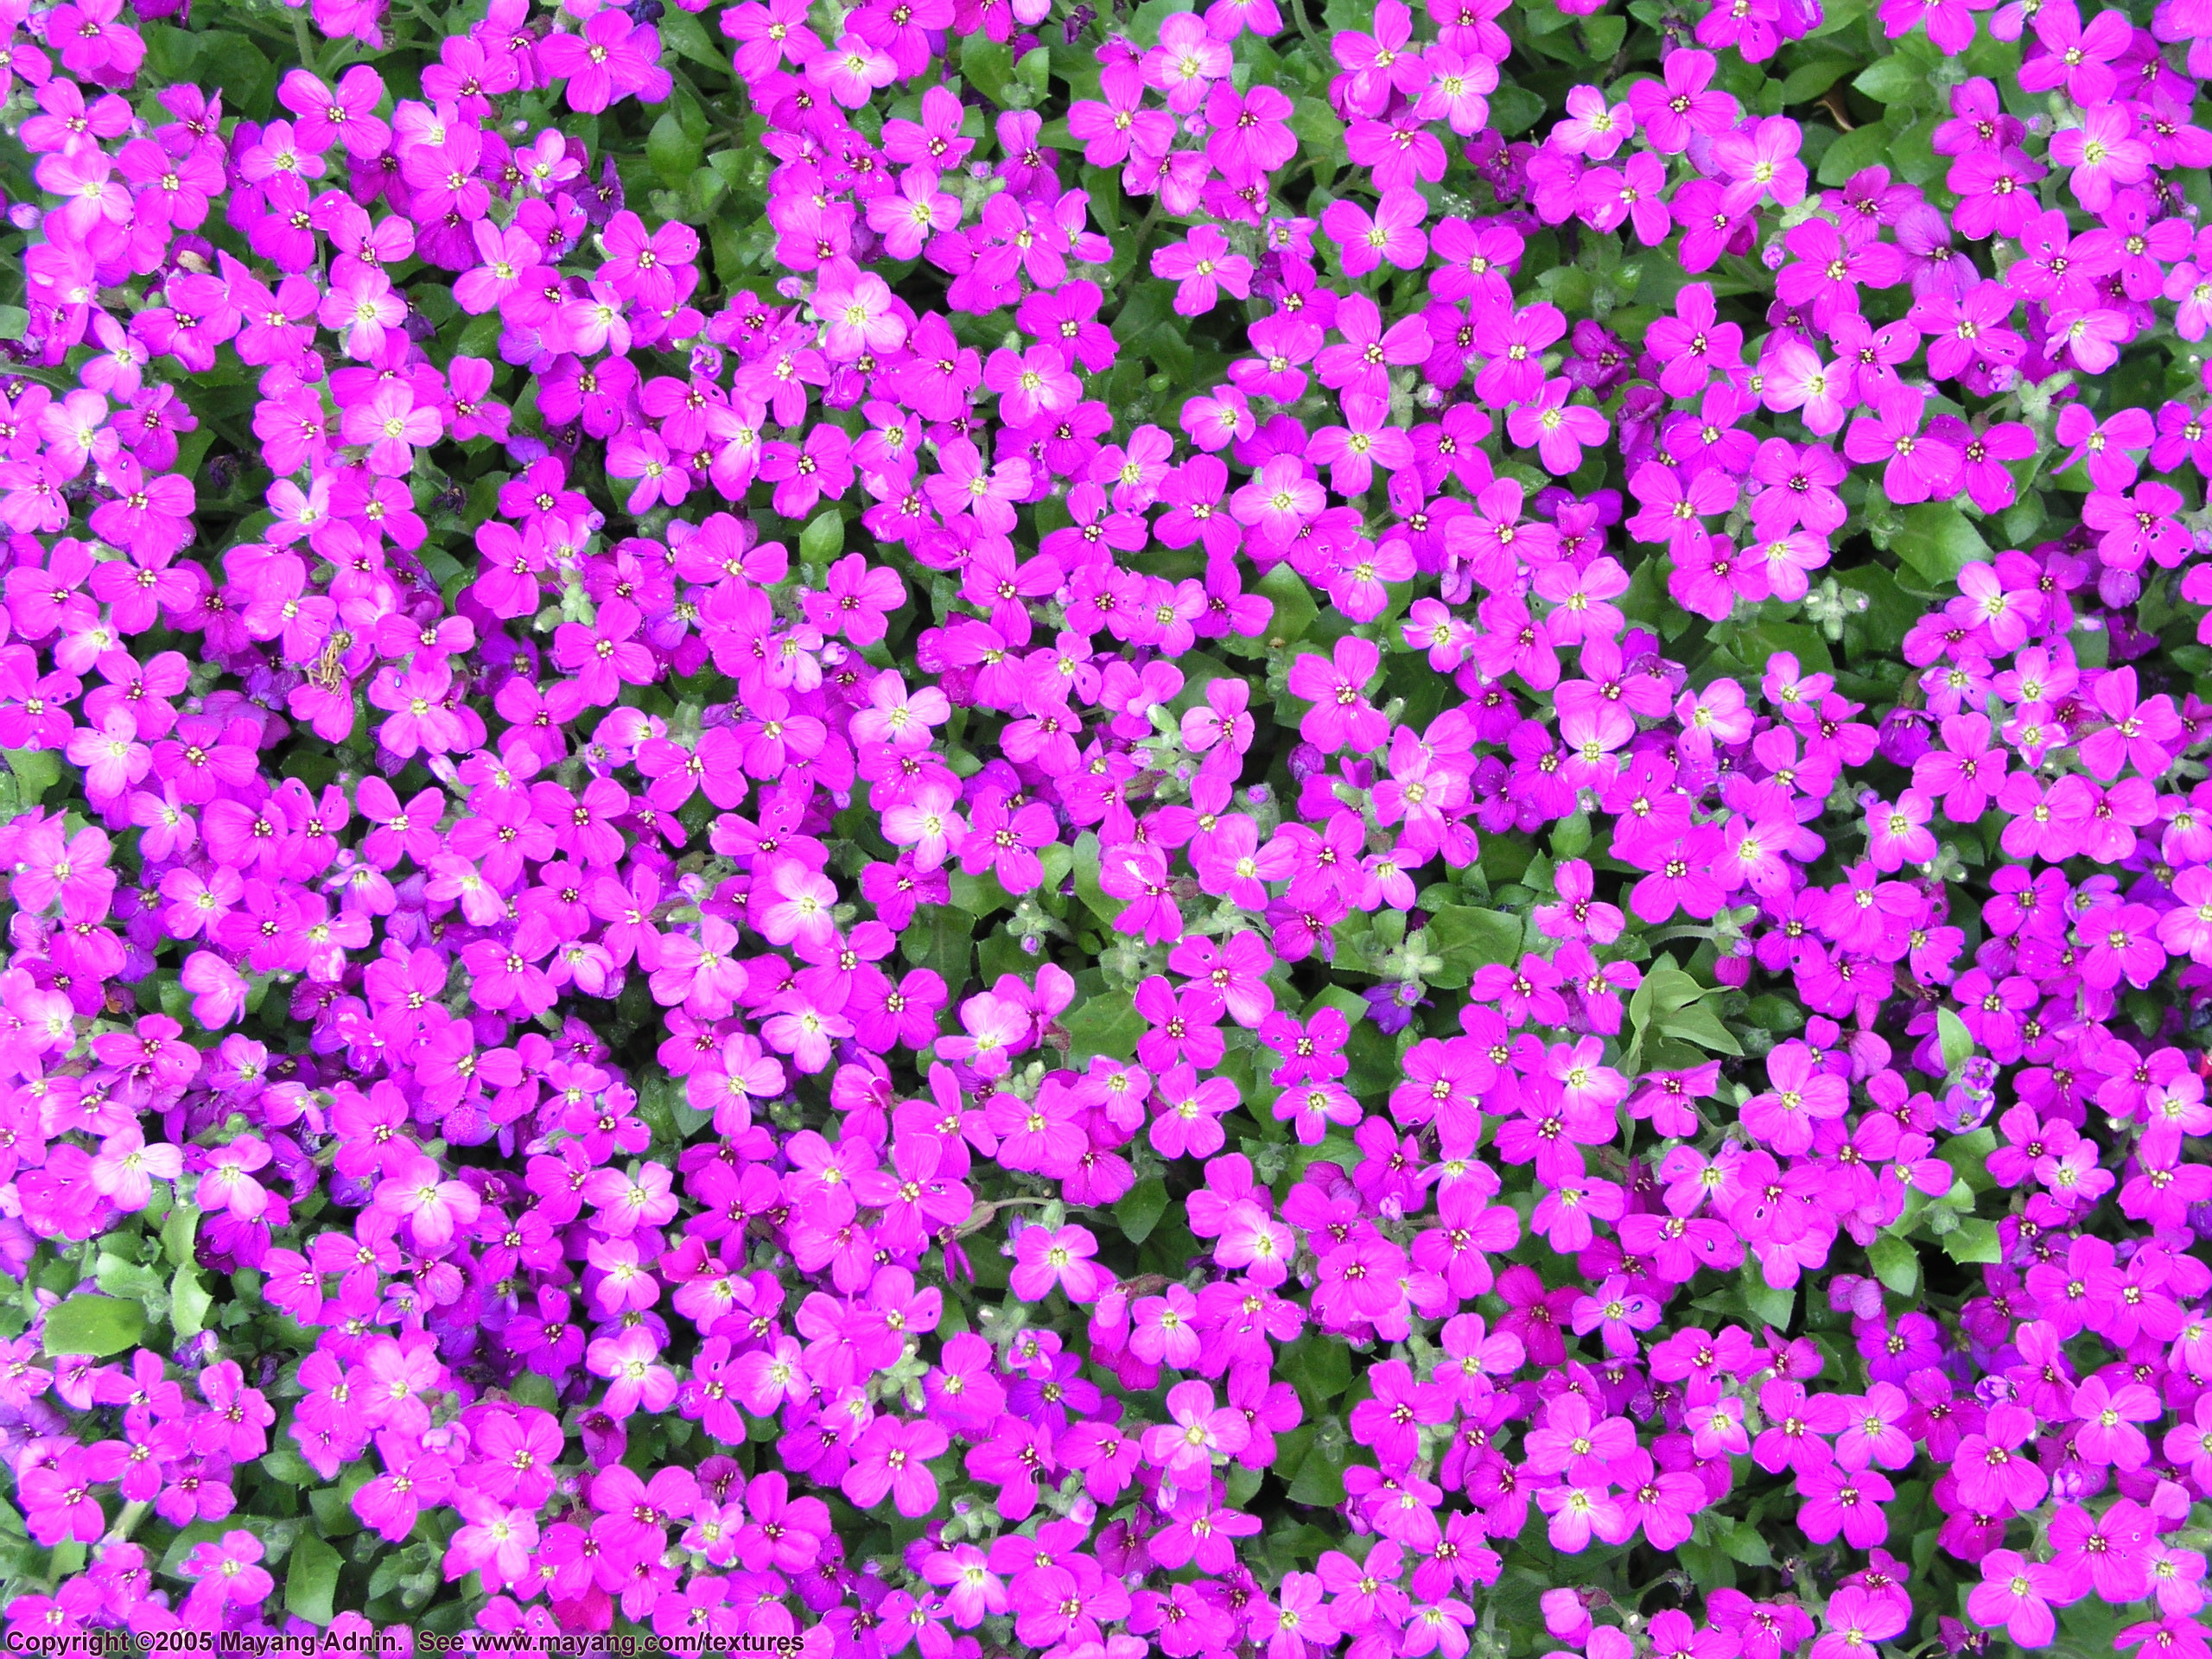 2560x1920 1920x1080 Pink And Purple Flower Backgrounds - Wallpaper Cave